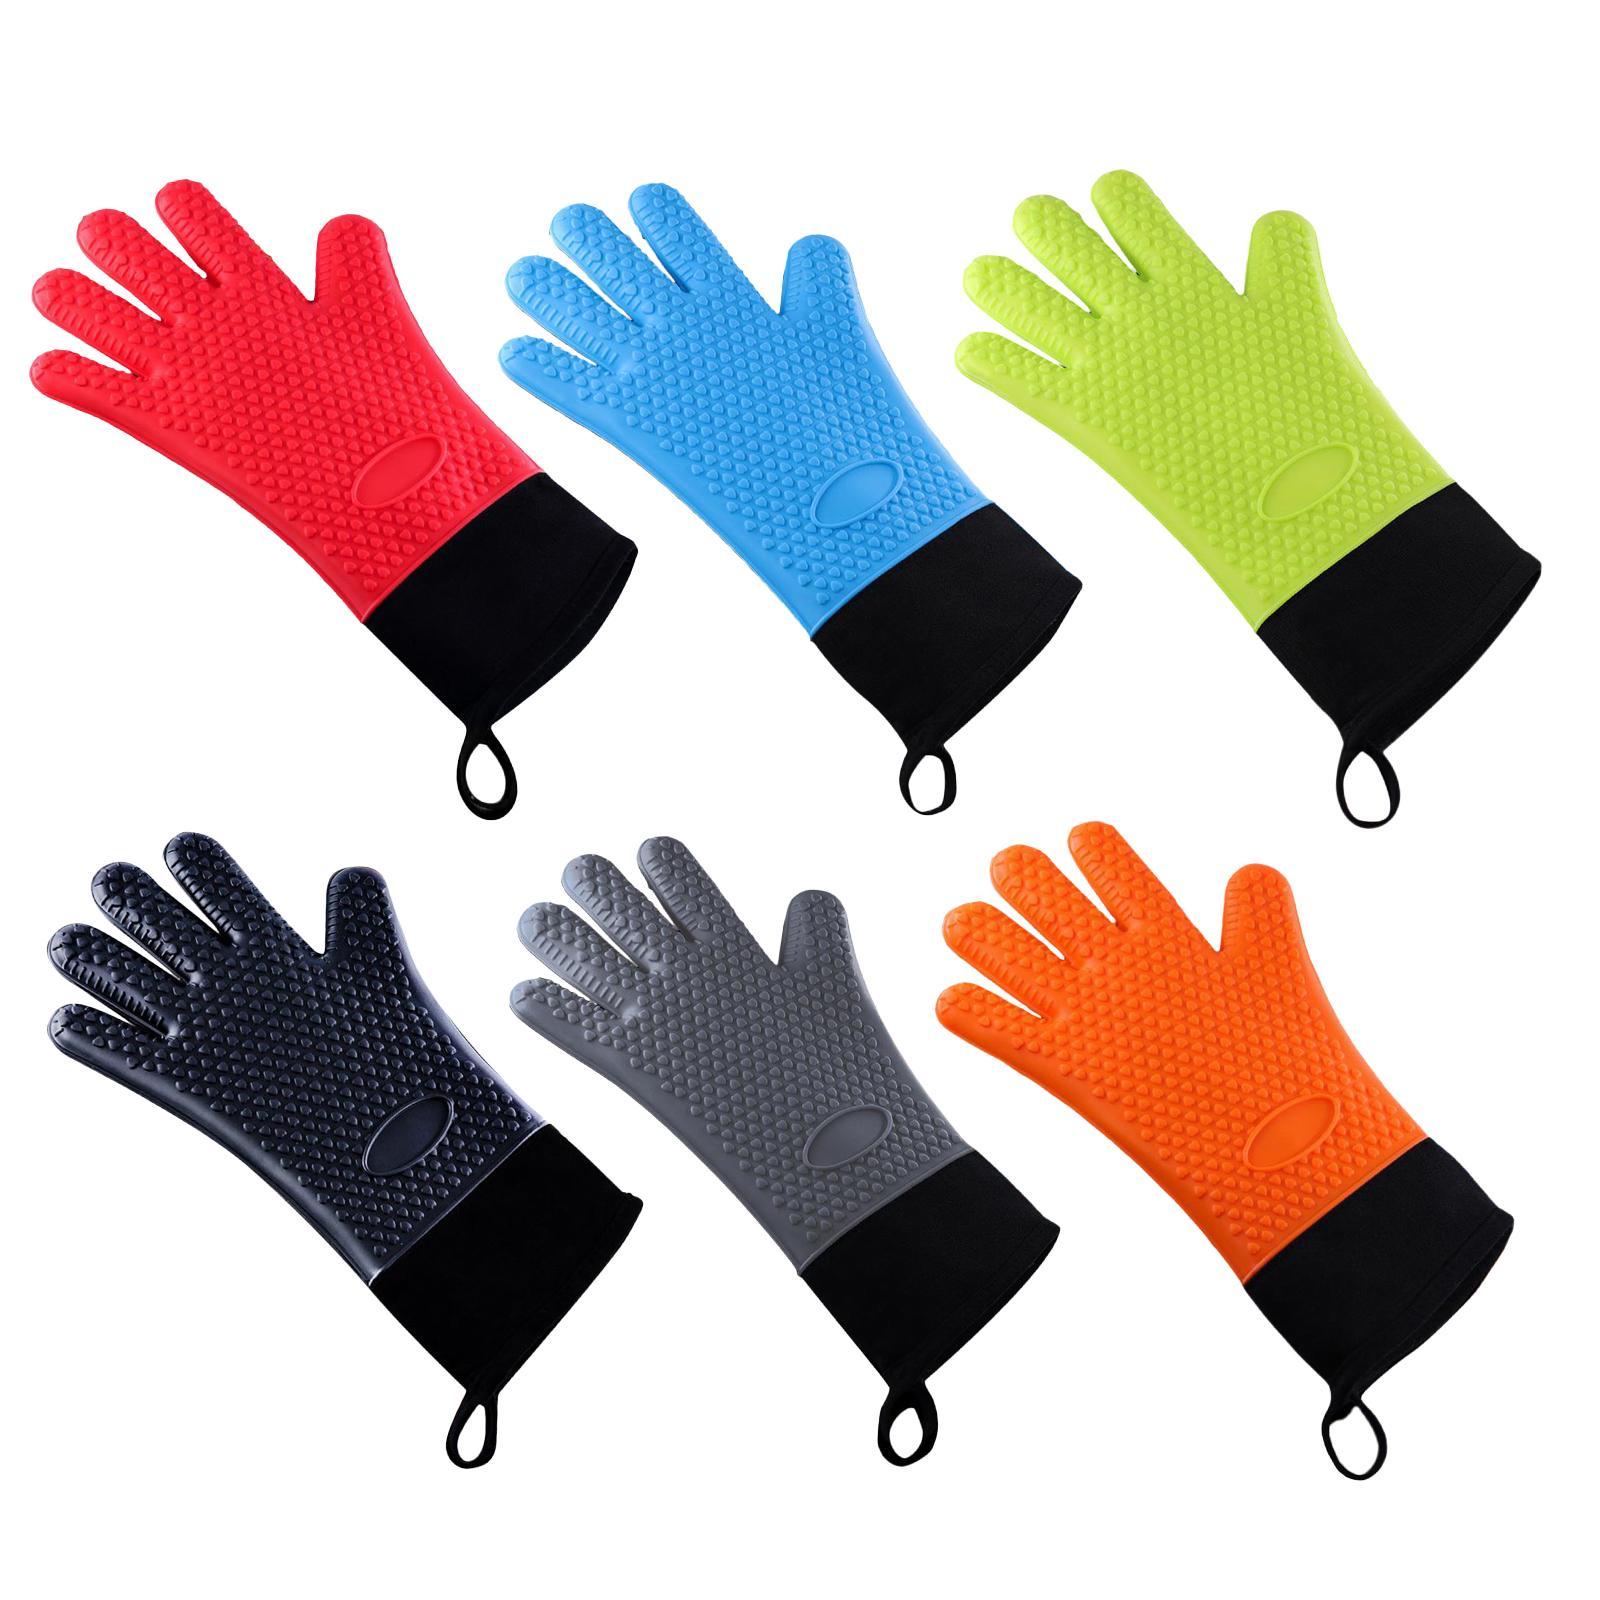 Premium Oven Gloves Insulated Long Anti-scalding Mitts for Cooking